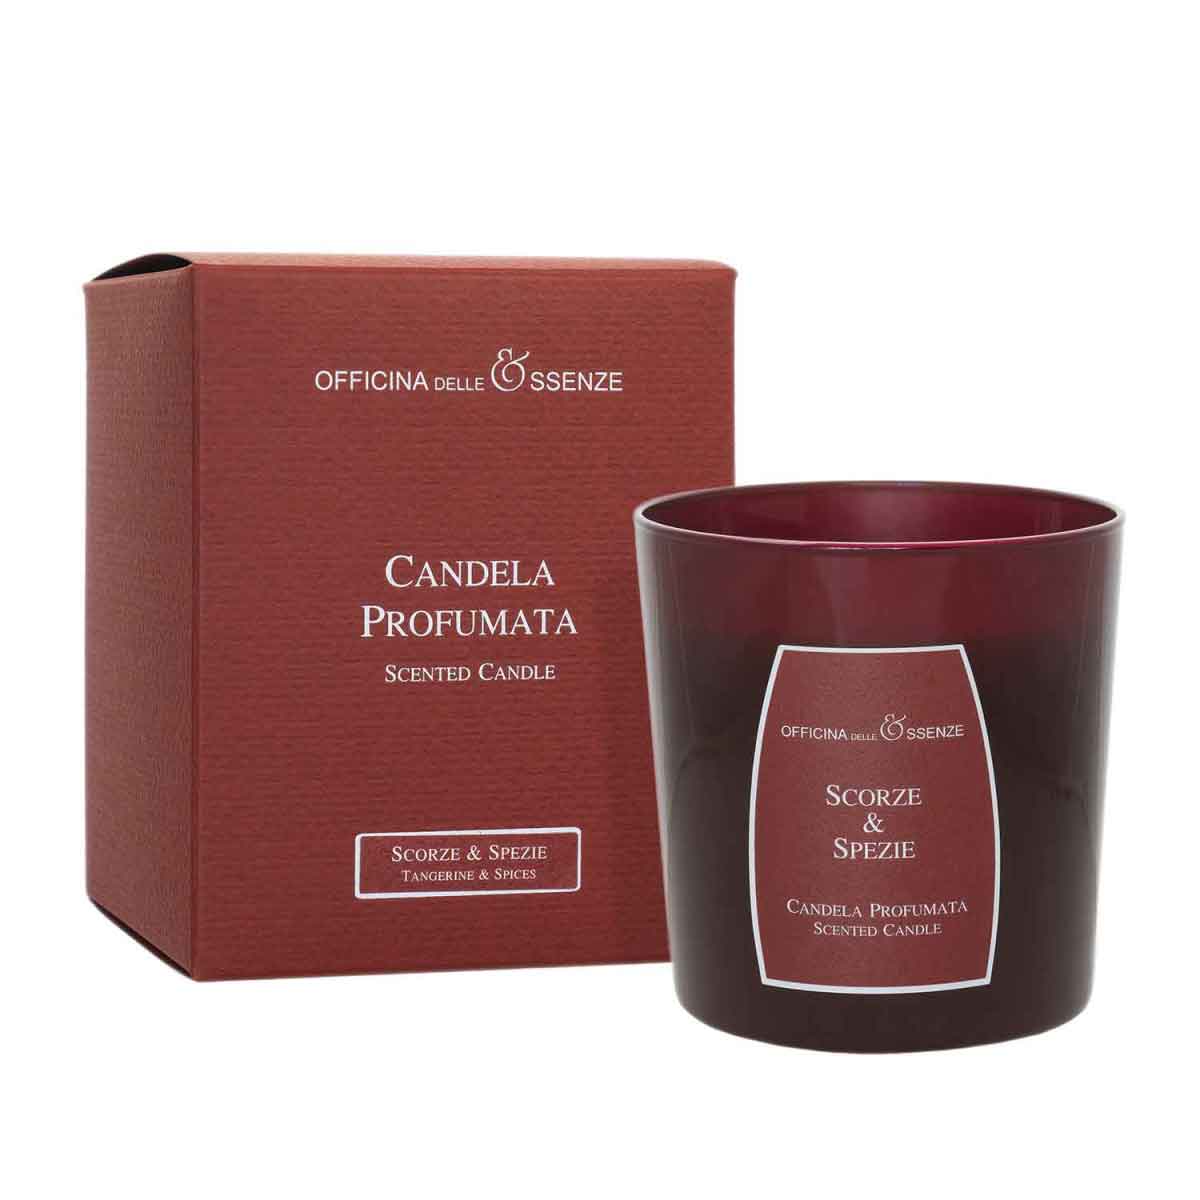 Tangerine & Spices scented candle with box